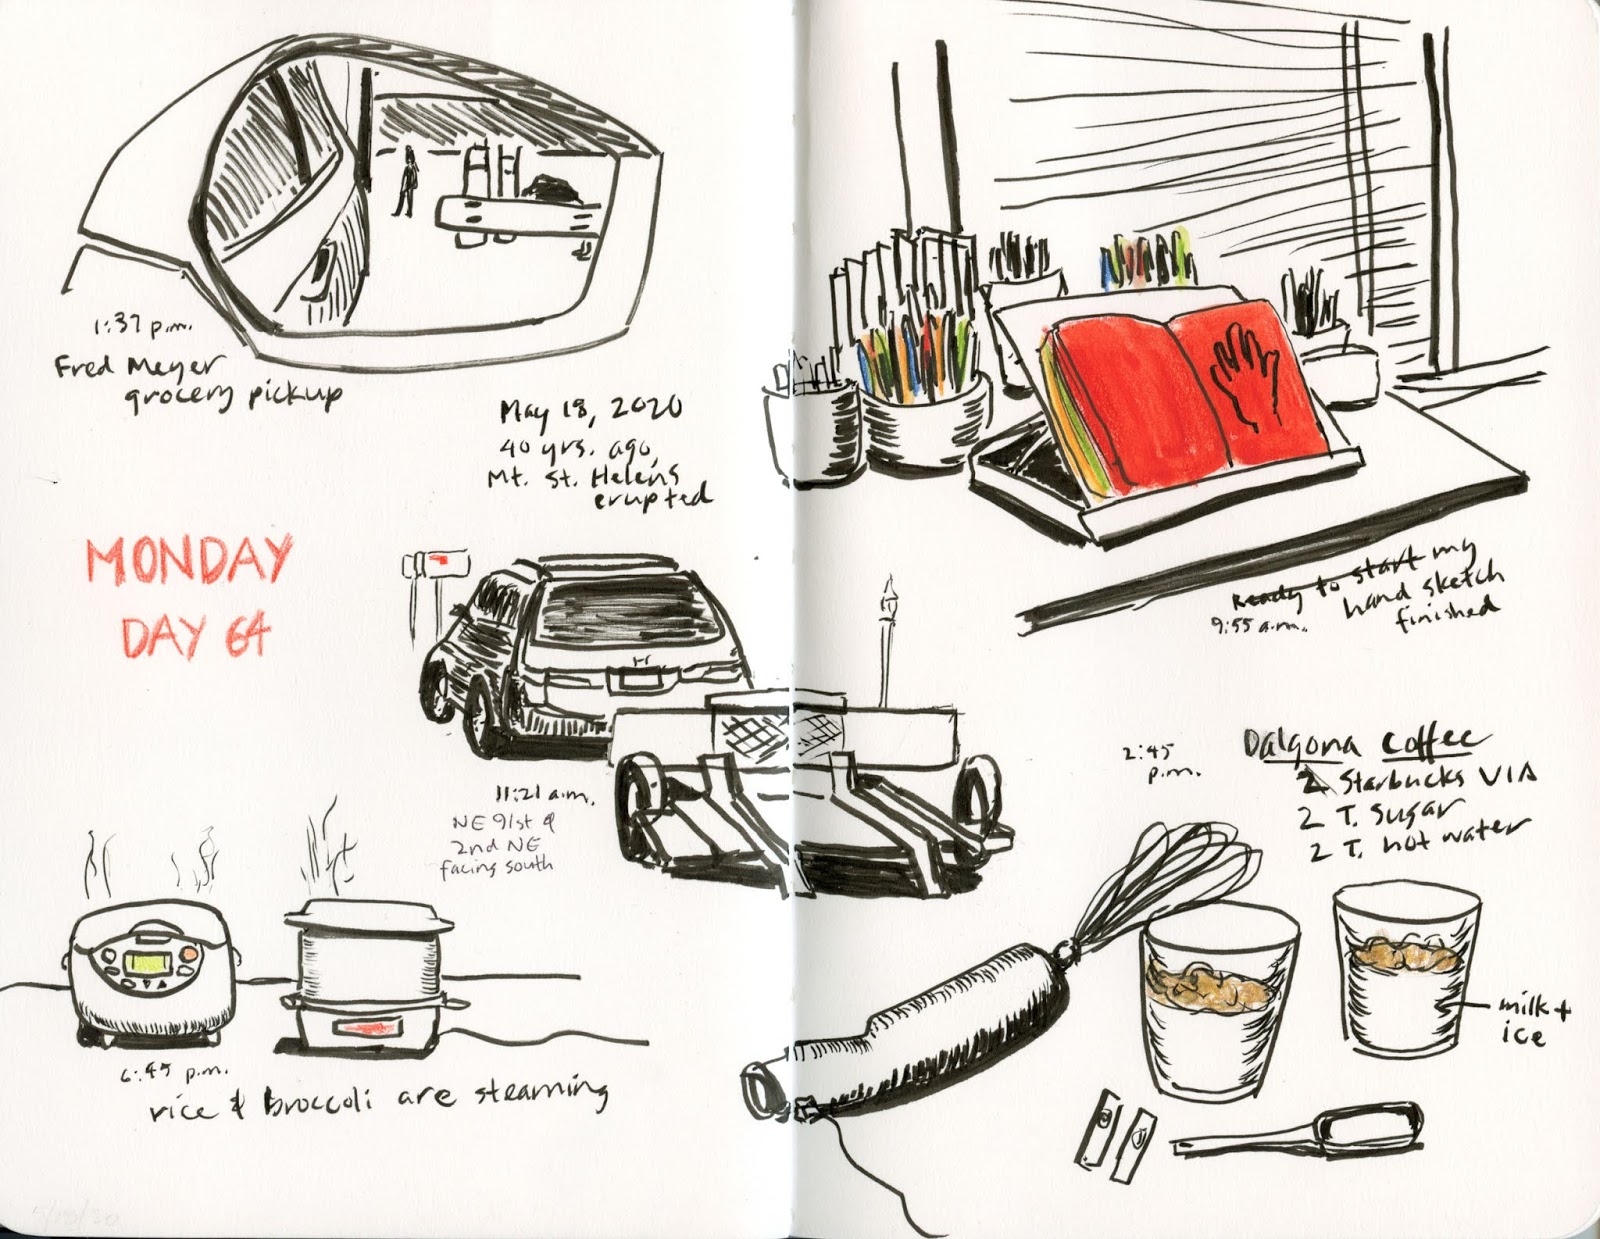 Fueled by Clouds & Coffee: Sketch Journal of an Ordinary Day